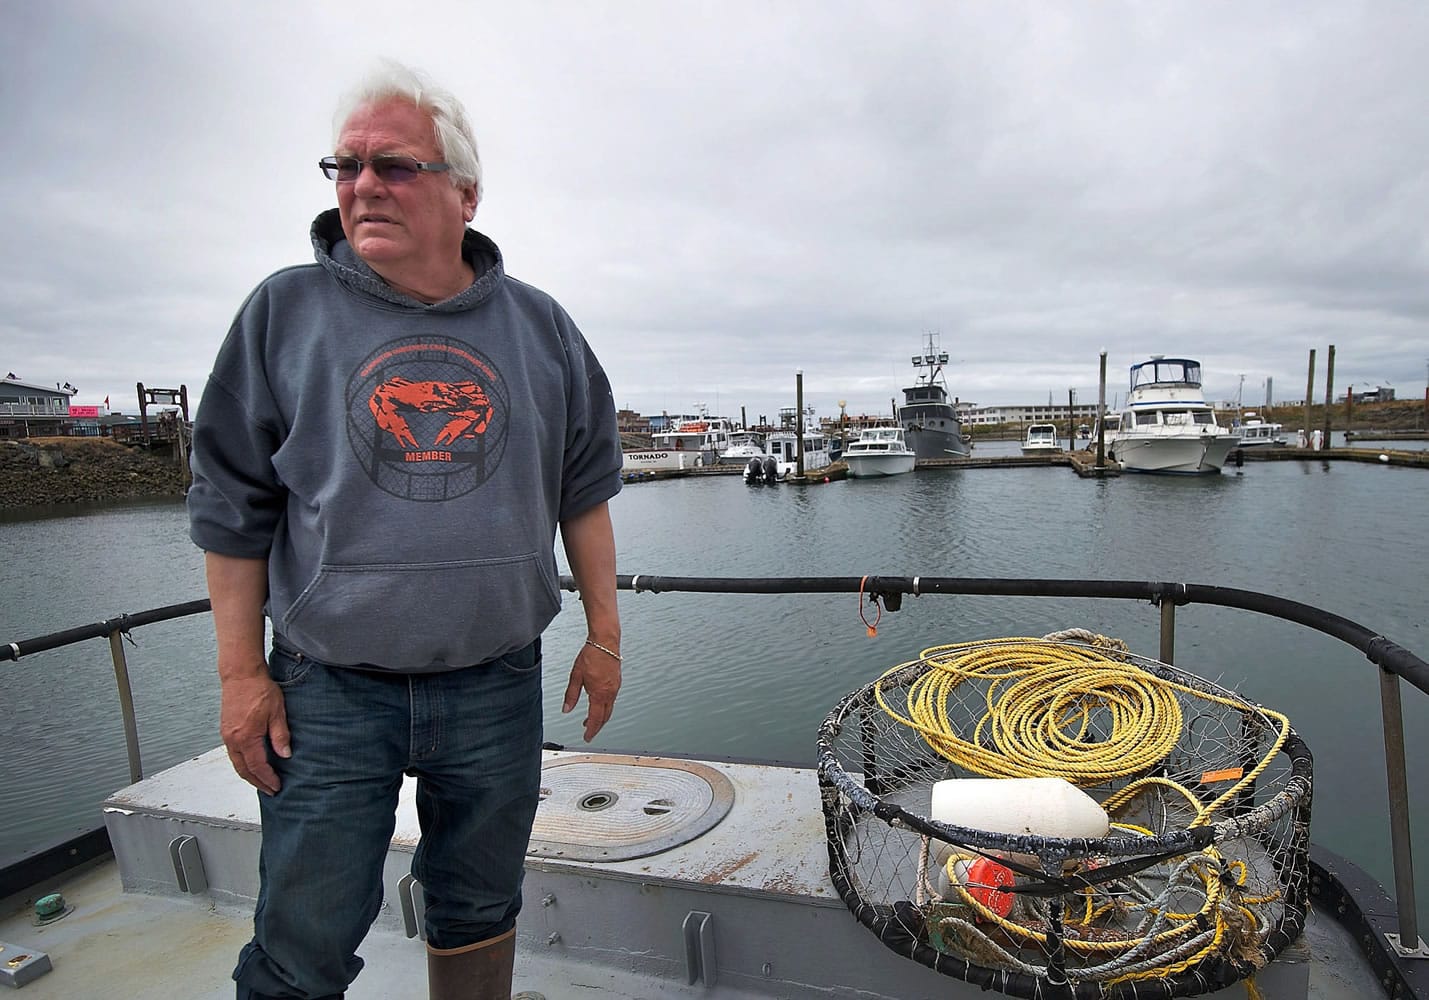 Crab fisherman Larry Thevik discusses his concerns regarding three proposed oil terminal sites in Grays Harbor County on his boat, the Midnight Star, while docked in Westport on Thursday, June 19, 2014.